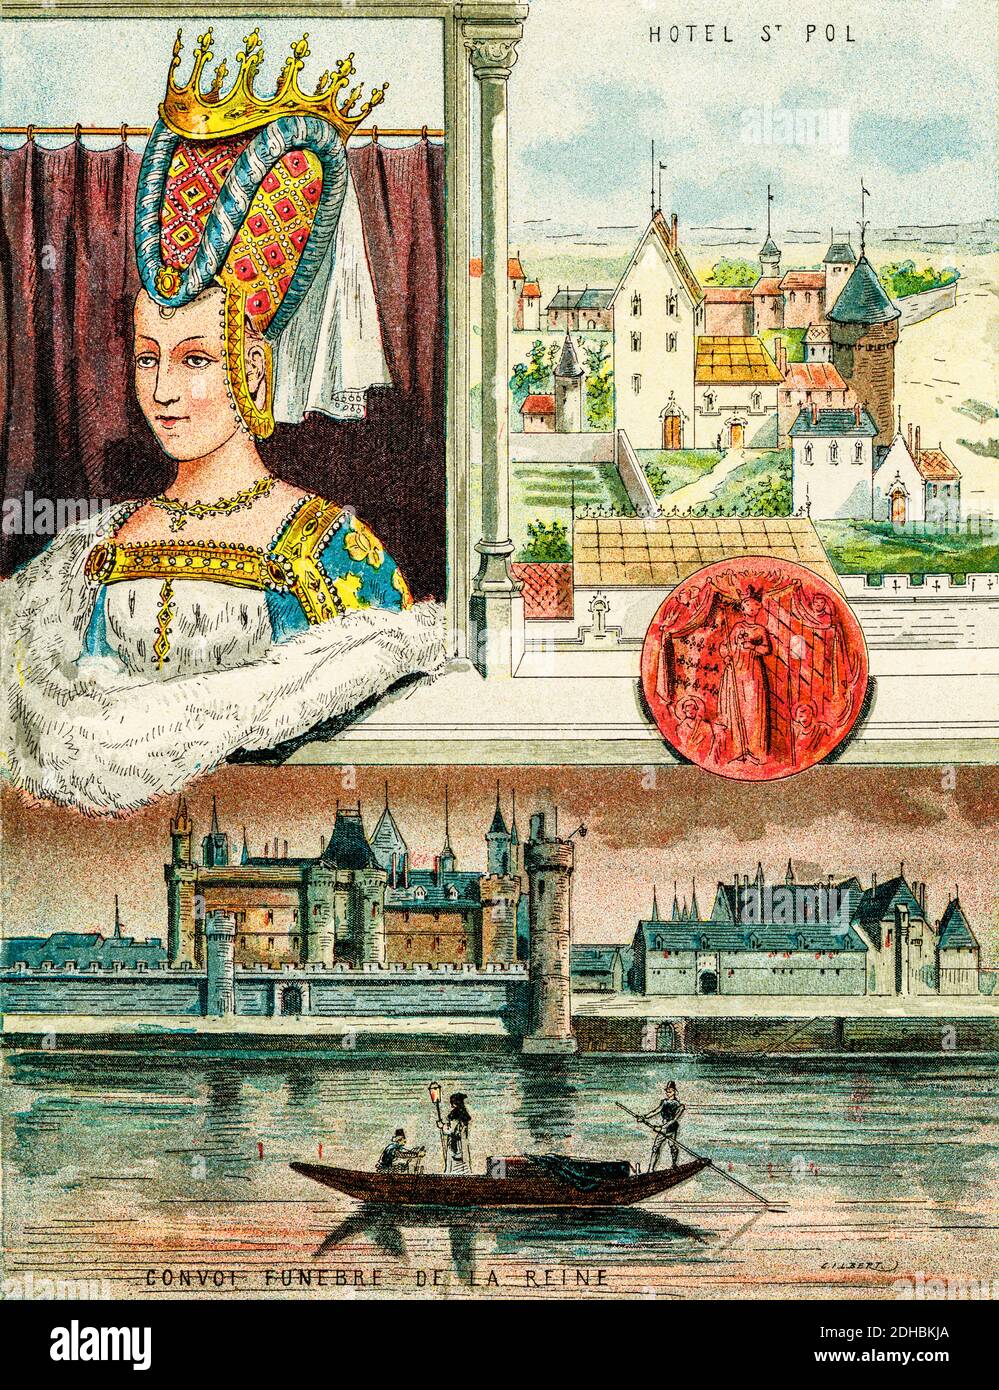 Old color lithography portrait of Isabeau of Bavaria. Elizabeth of Bavaria-Ingolstadt (1370-1435) Queen of France between 1385 and 1422. She was born in the House of Wittelsbach. wife of King Charles VI of France. Regent of the Dolphin of France. Les Français Illustres by Gustave Demoulin 1897 Stock Photo